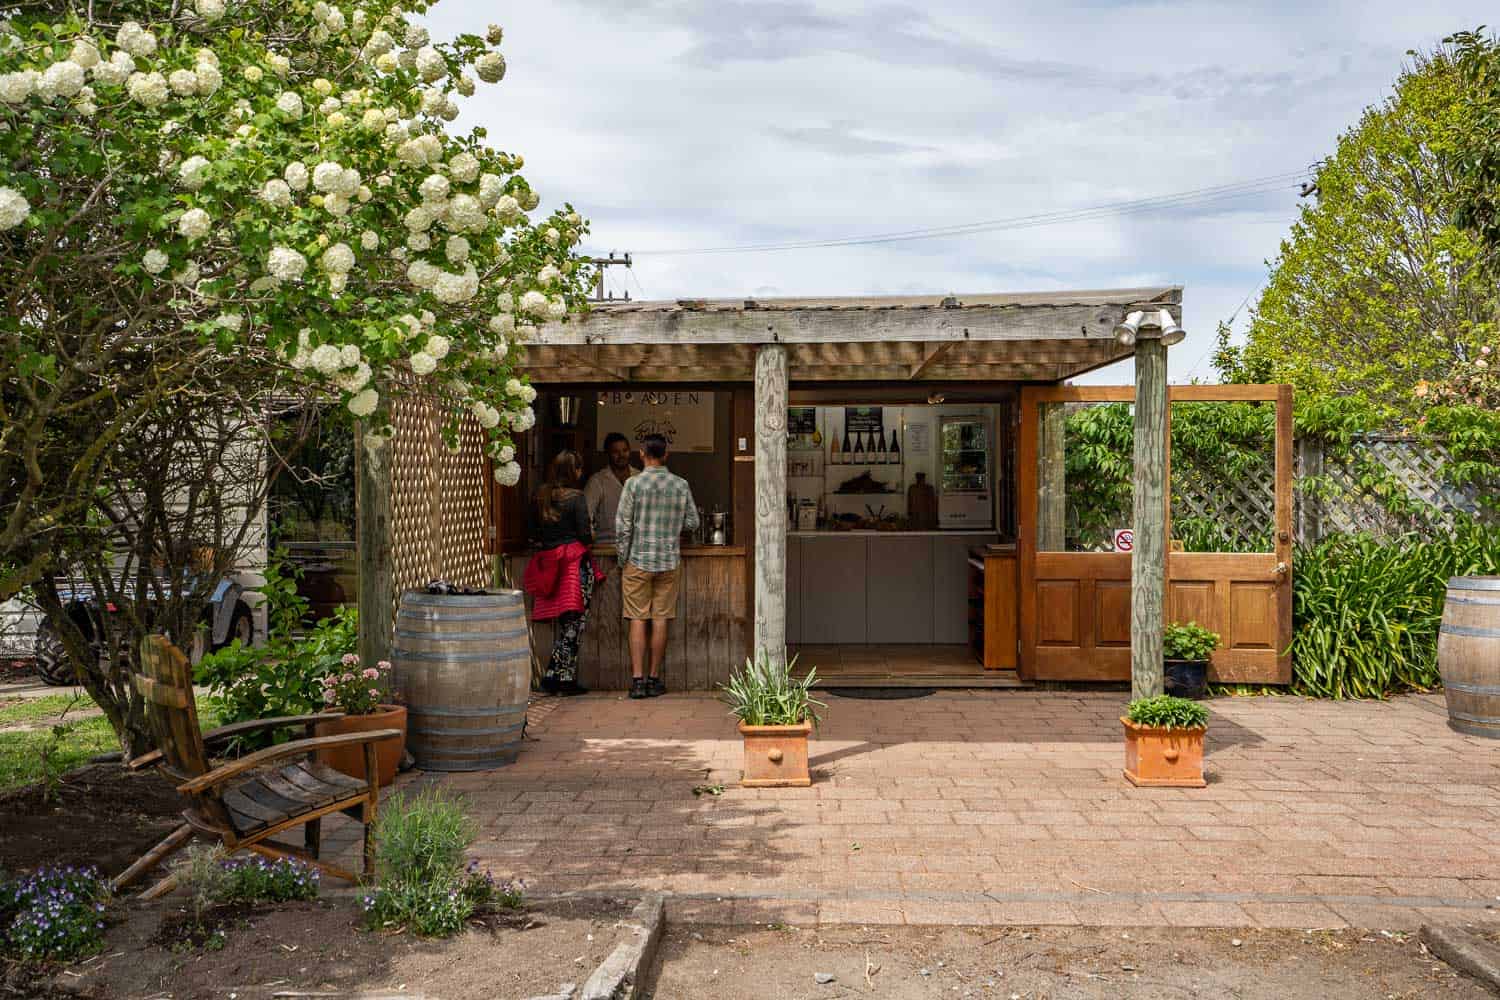 The outdoor tasting room at Bladen winery in Marlborough, New Zealand